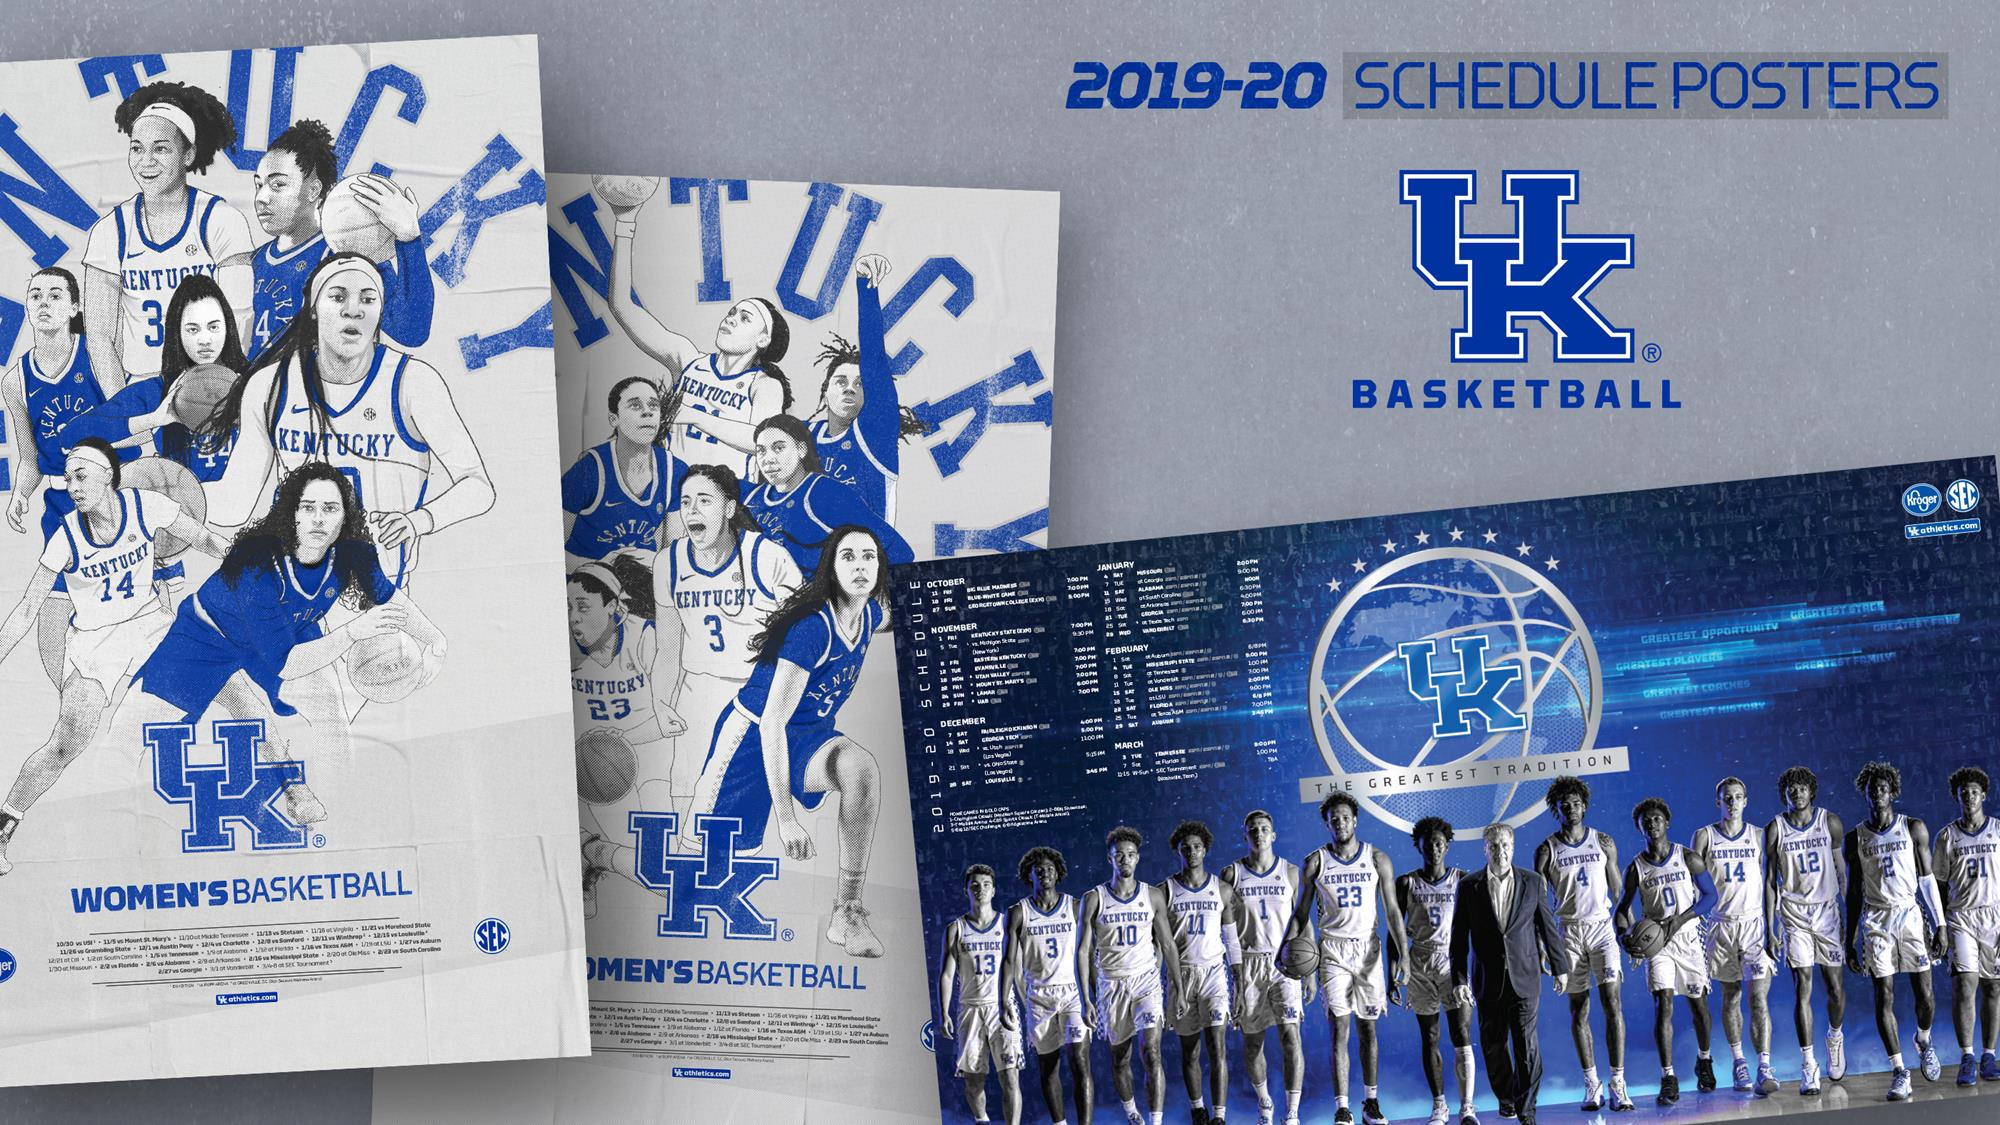 Men’s, Women’s Basketball Poster Distribution This Weekend